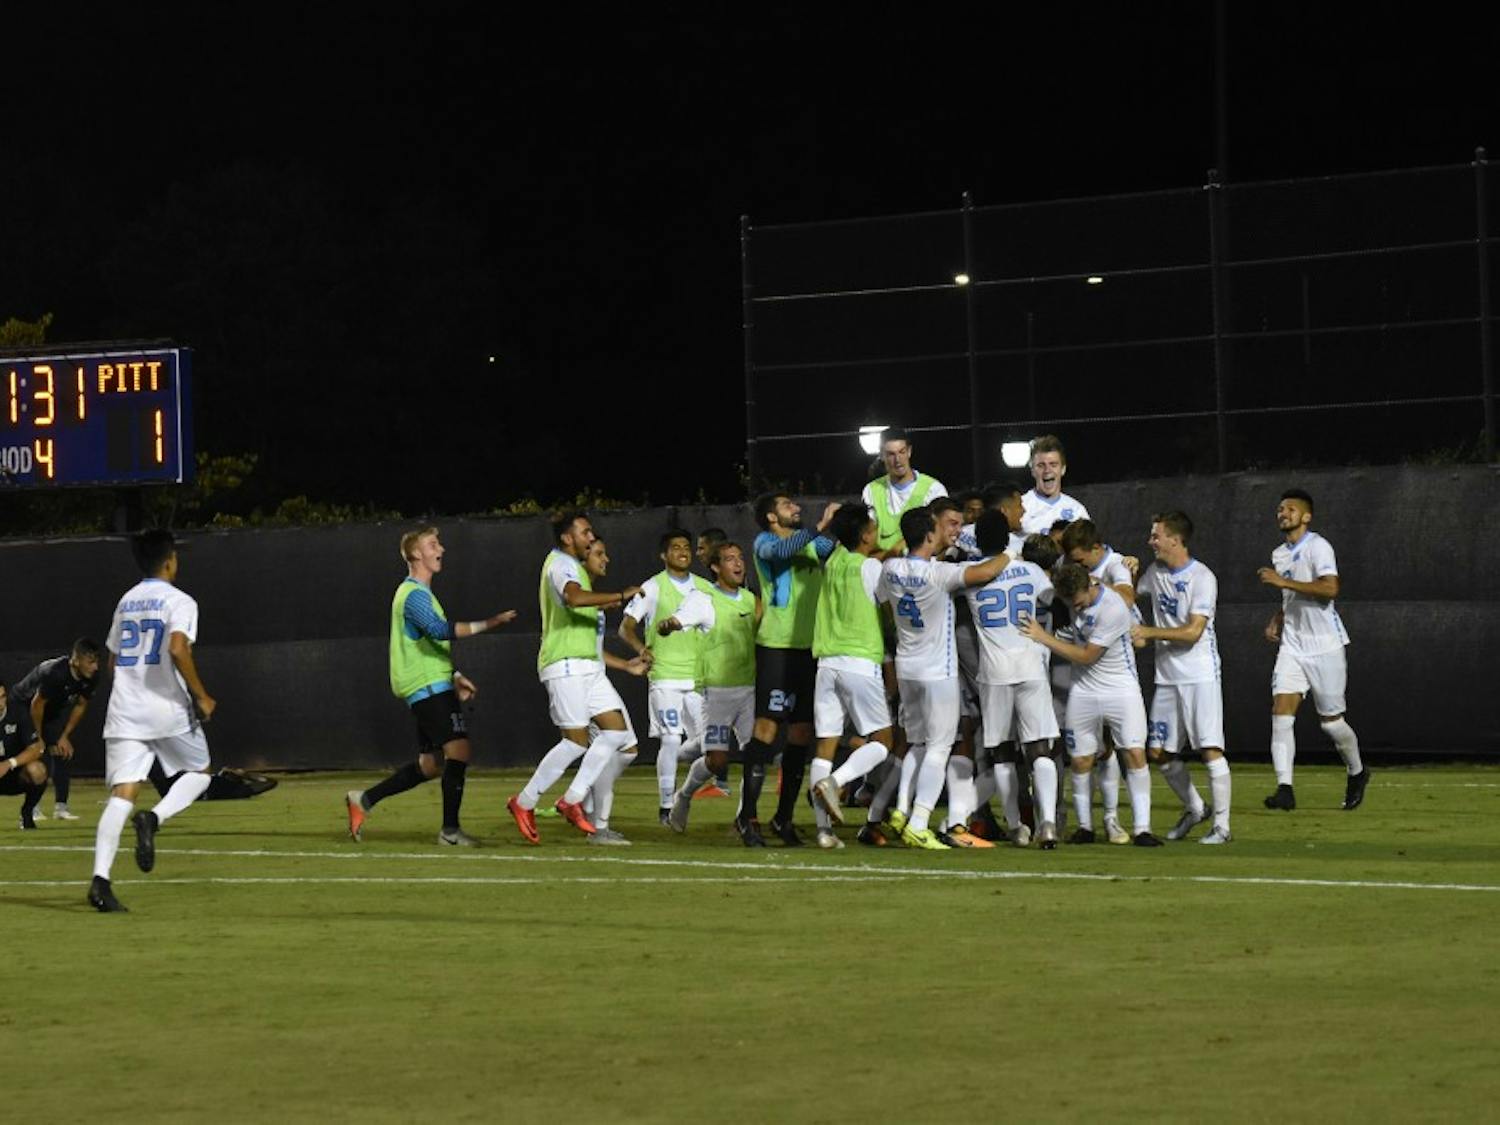 The Mens Soccer team beats Pittsburgh 2-1 in double overtime at Koskinen Stadium on Saturday night.